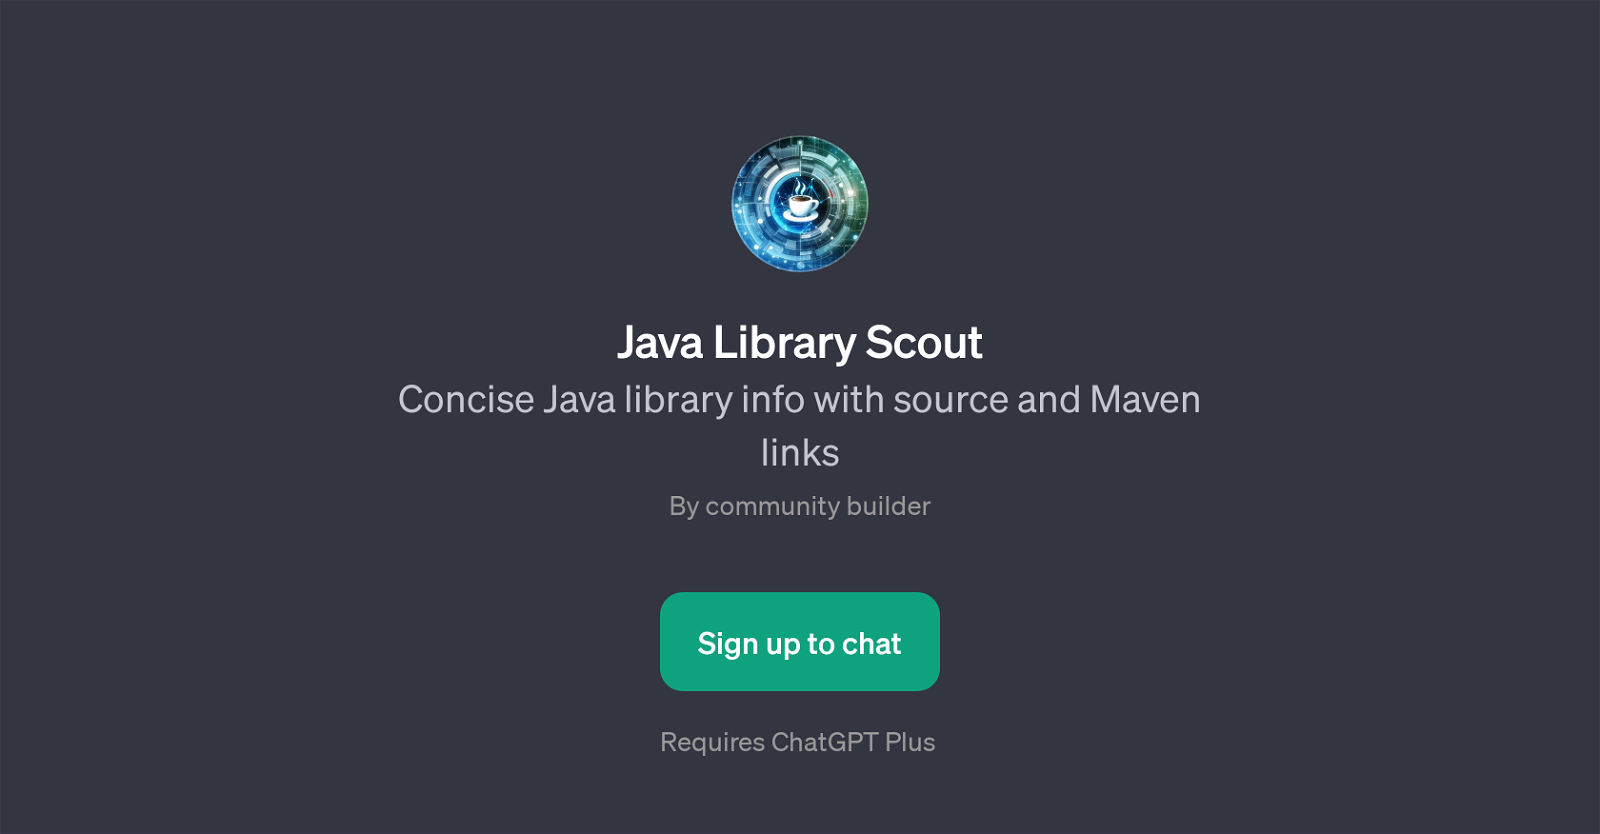 Java Library Scout website